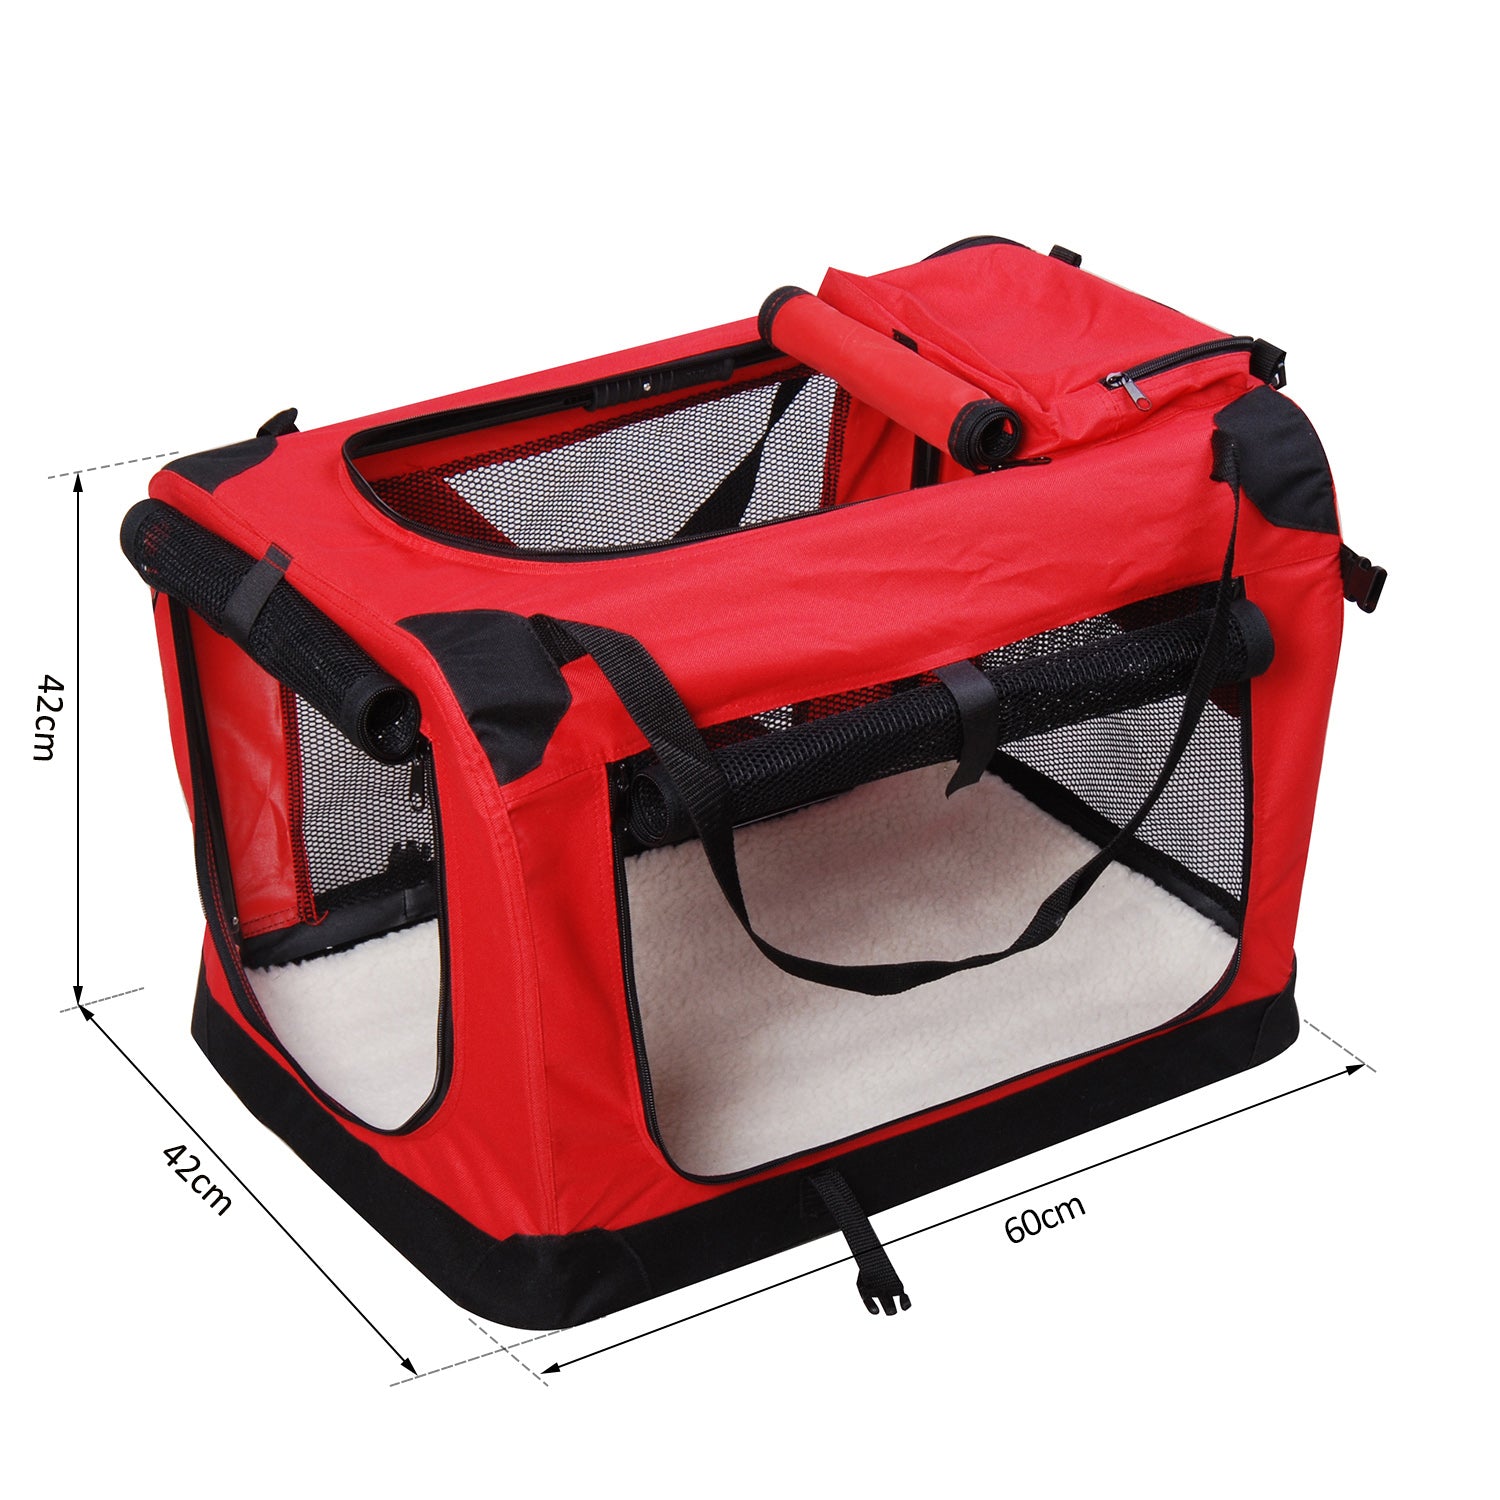 Small Pets PVC Oxford Cloth Travel Carrier w/ Mesh Windows Red